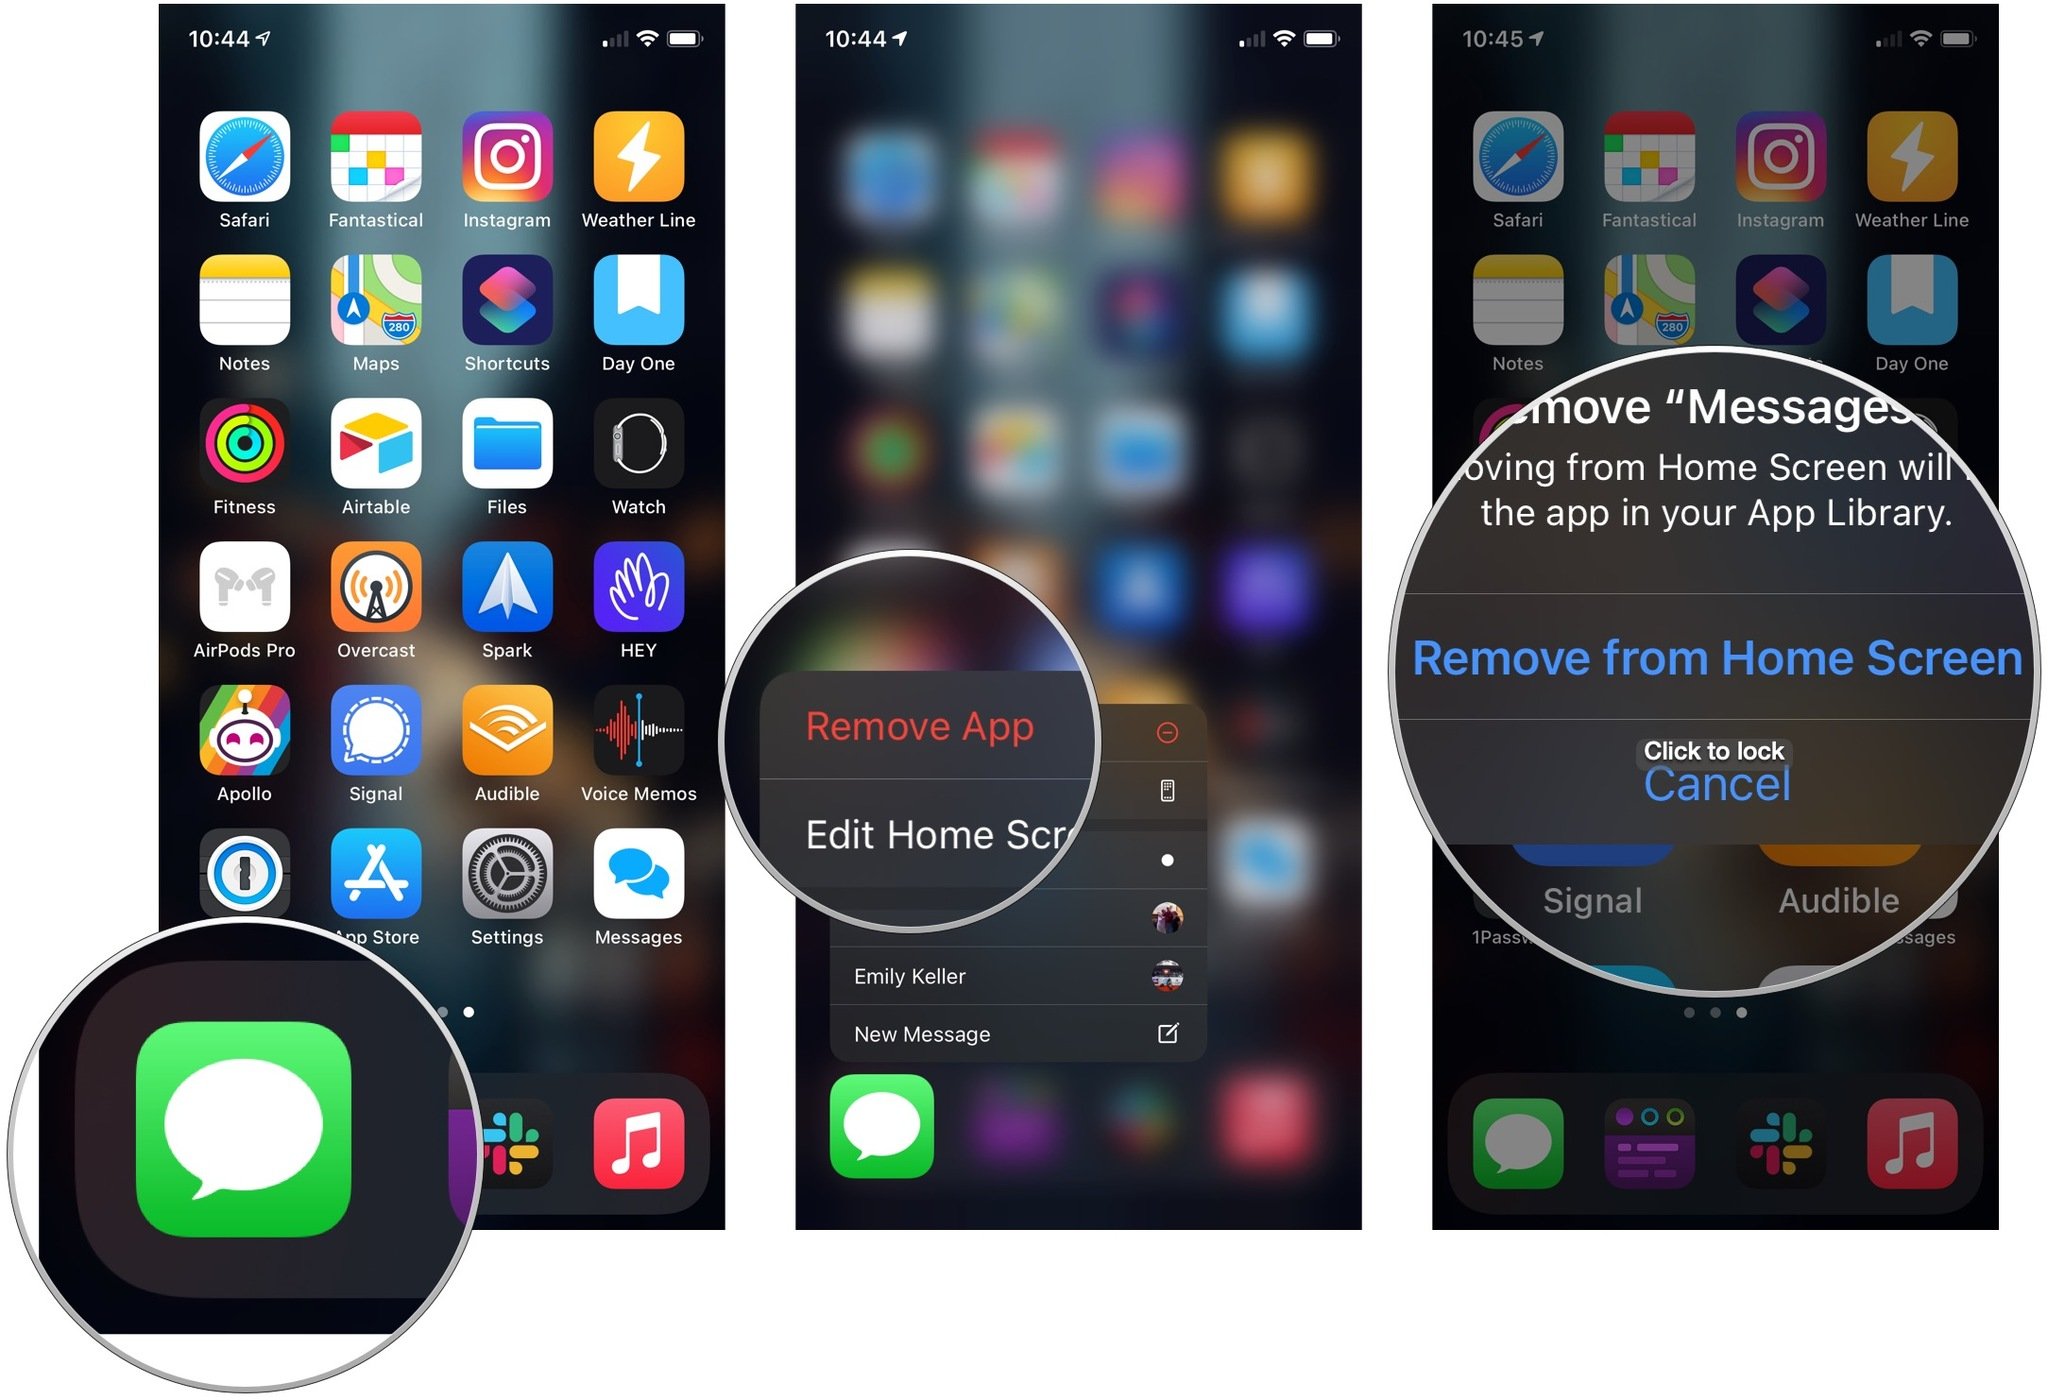 Hide apps in App Library, showing how to tap and hold an app, then tap Remove App, then tap Remove from Home Screen